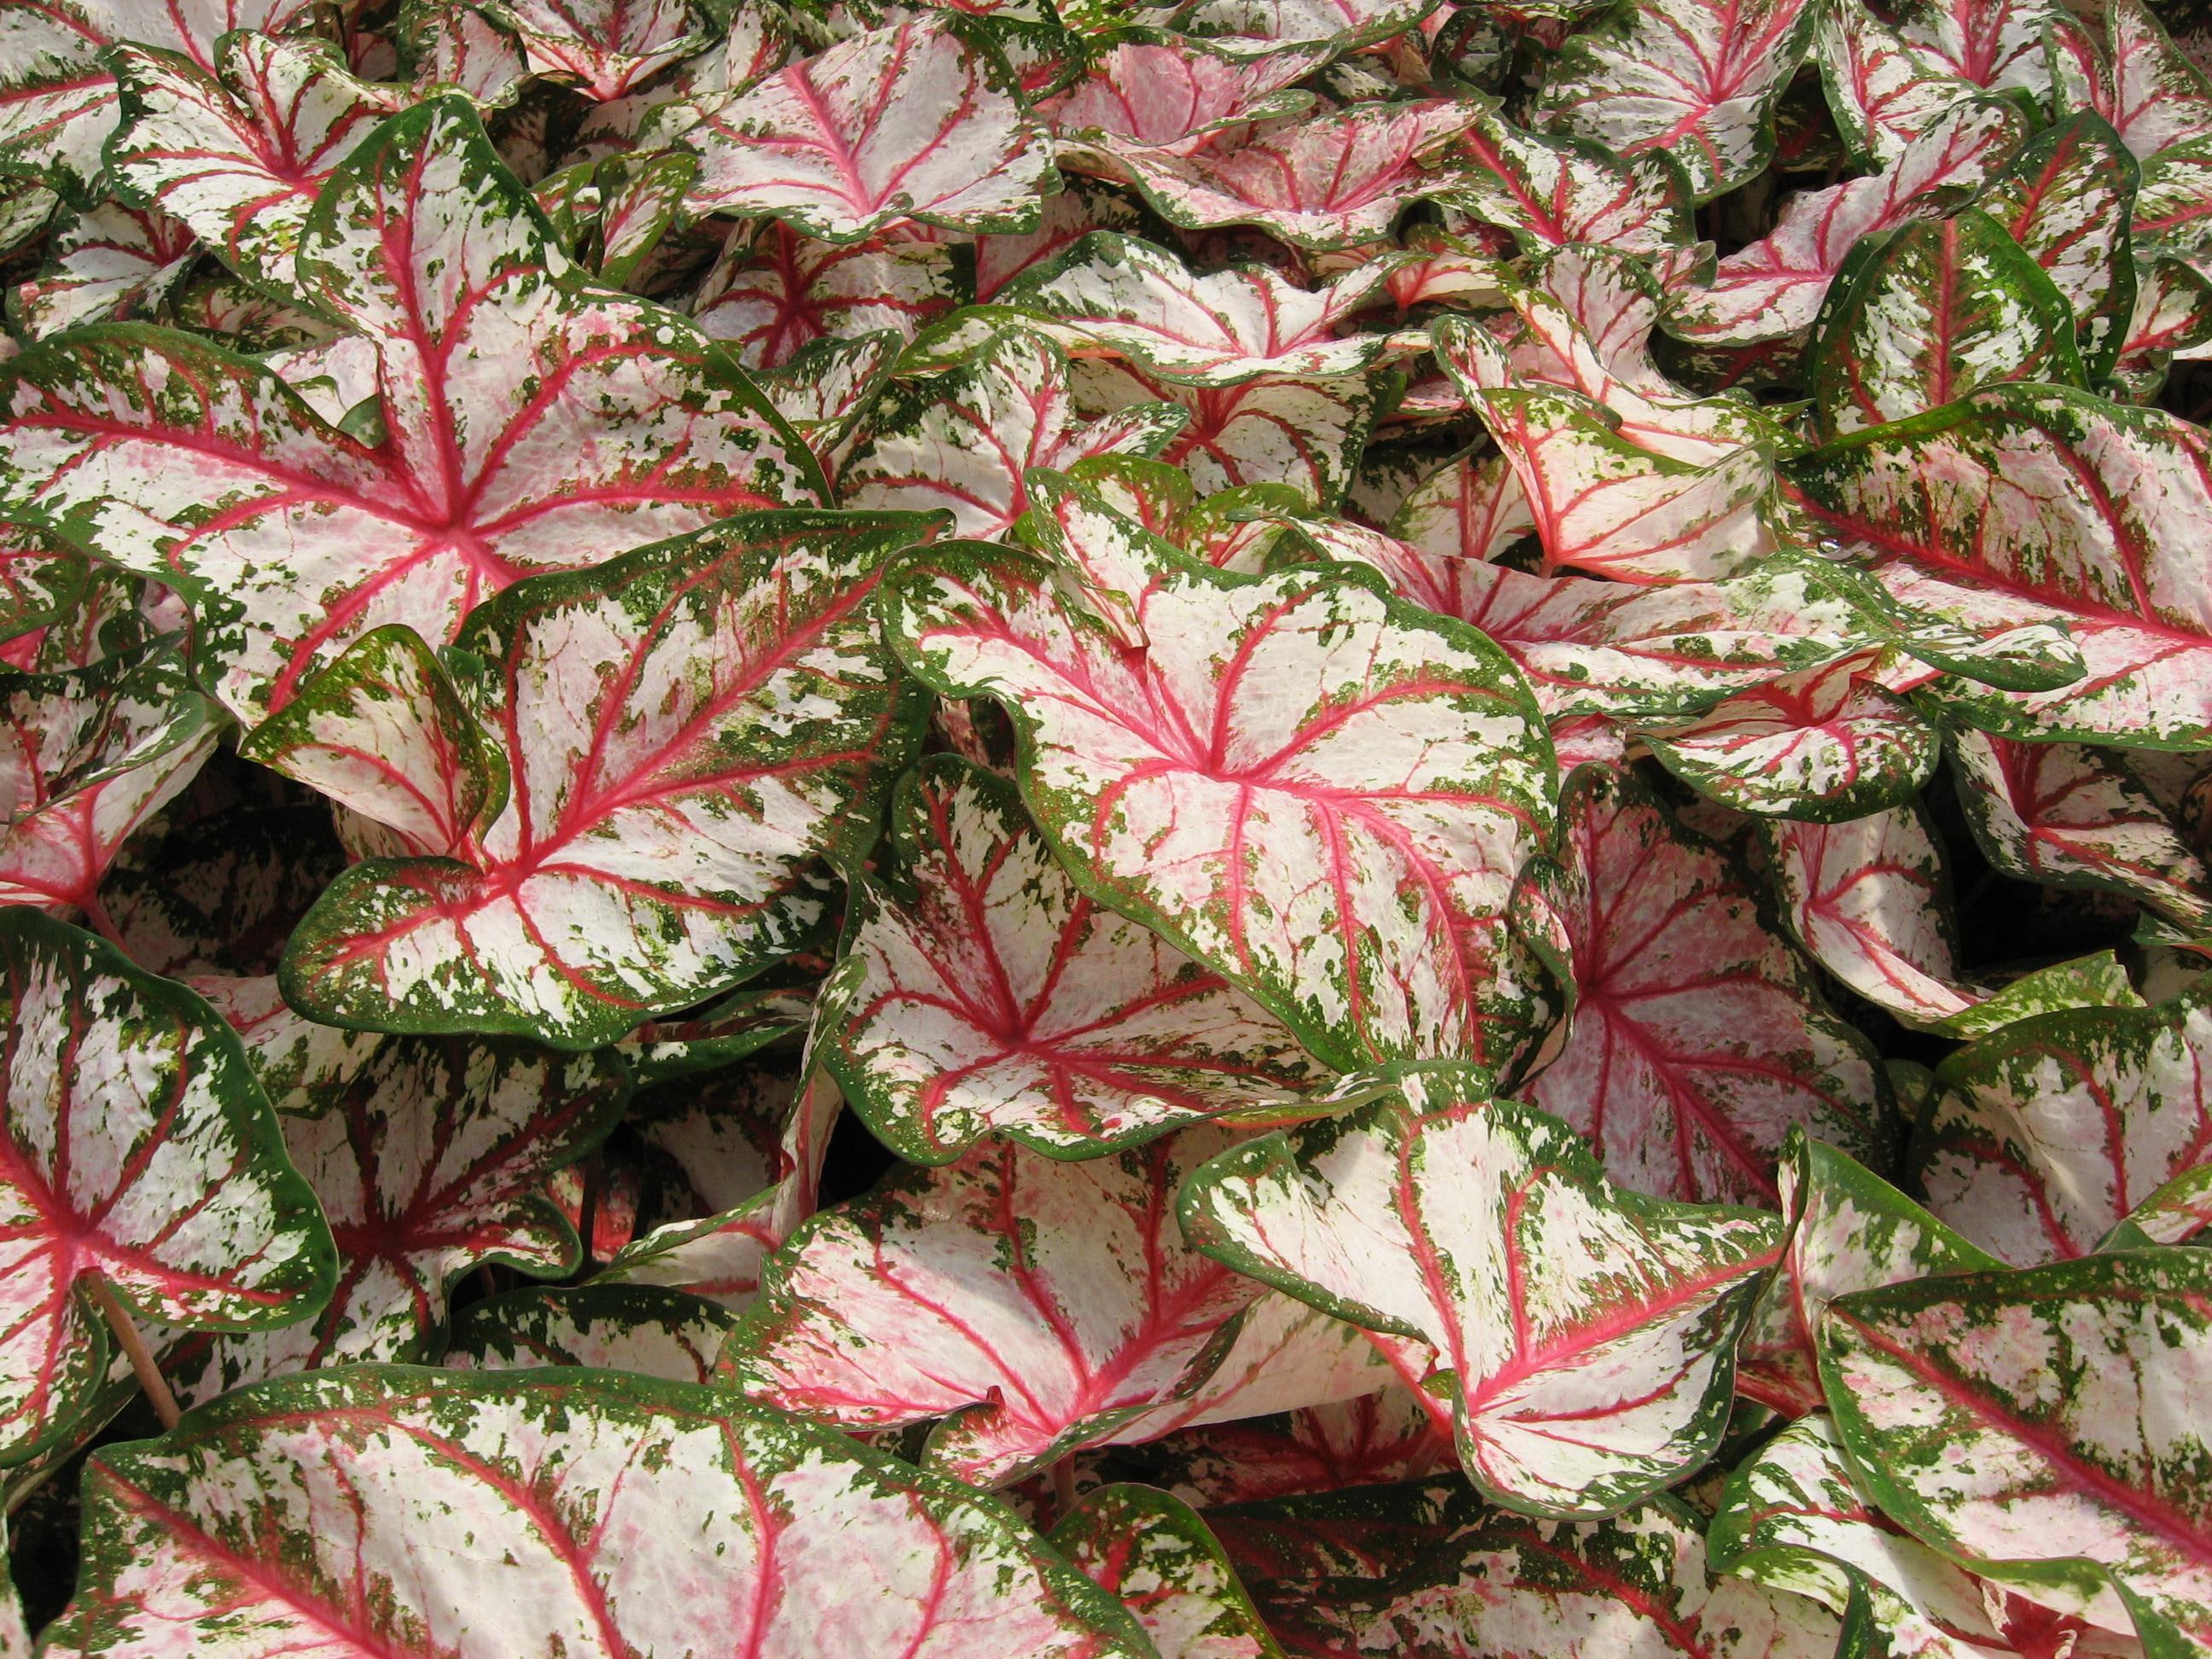 Caladium Flowers, white-red-and-green leaf plant, many